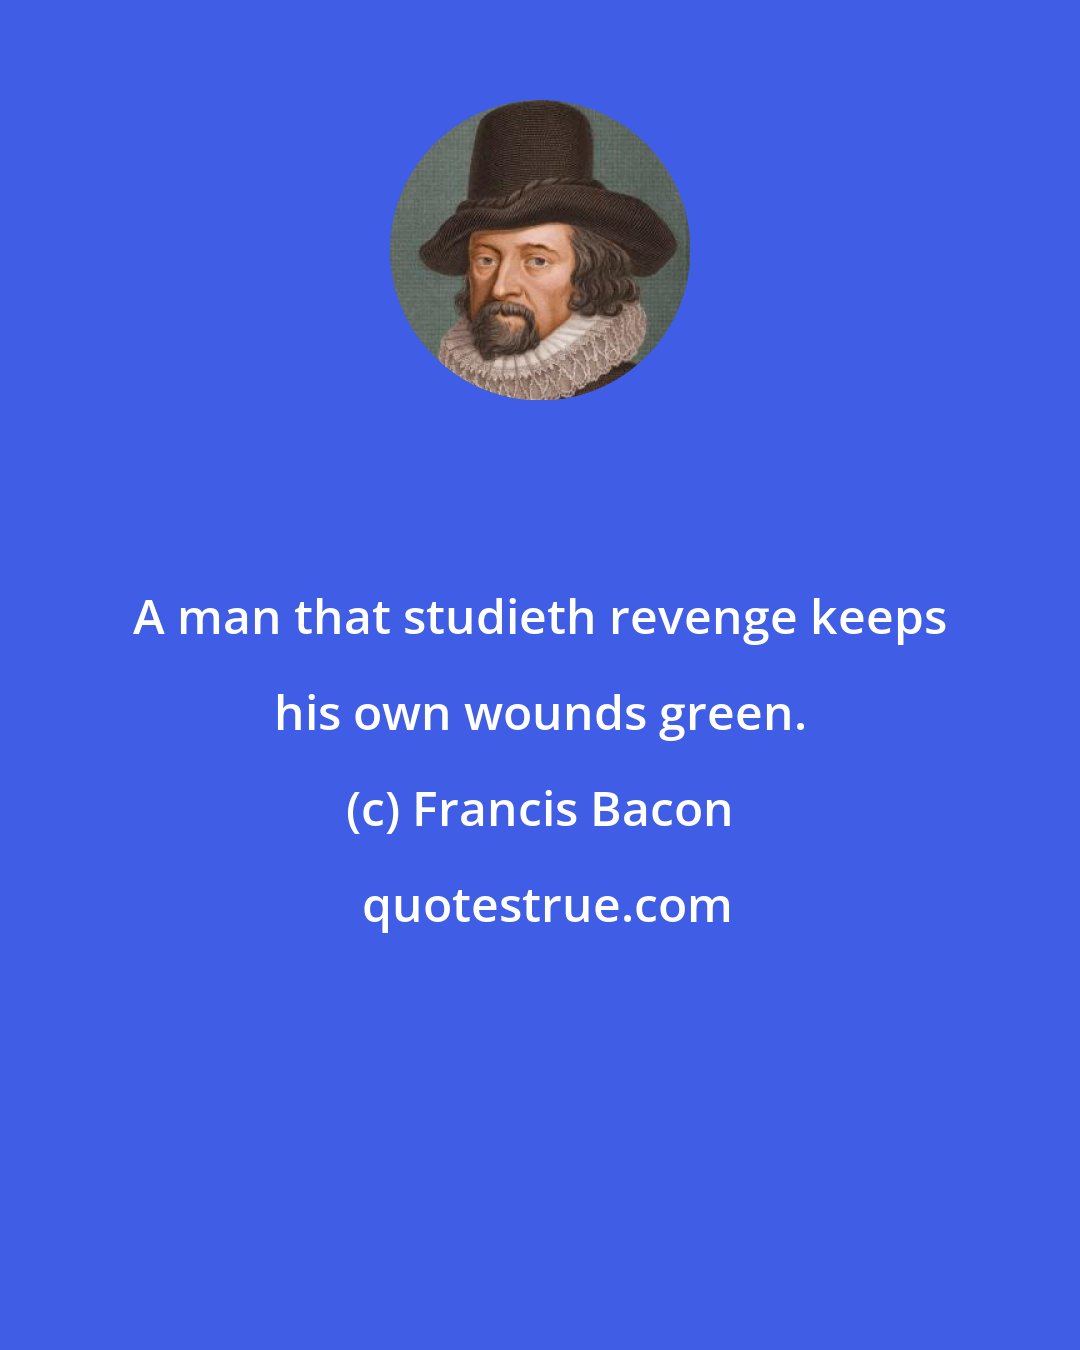 Francis Bacon: A man that studieth revenge keeps his own wounds green.